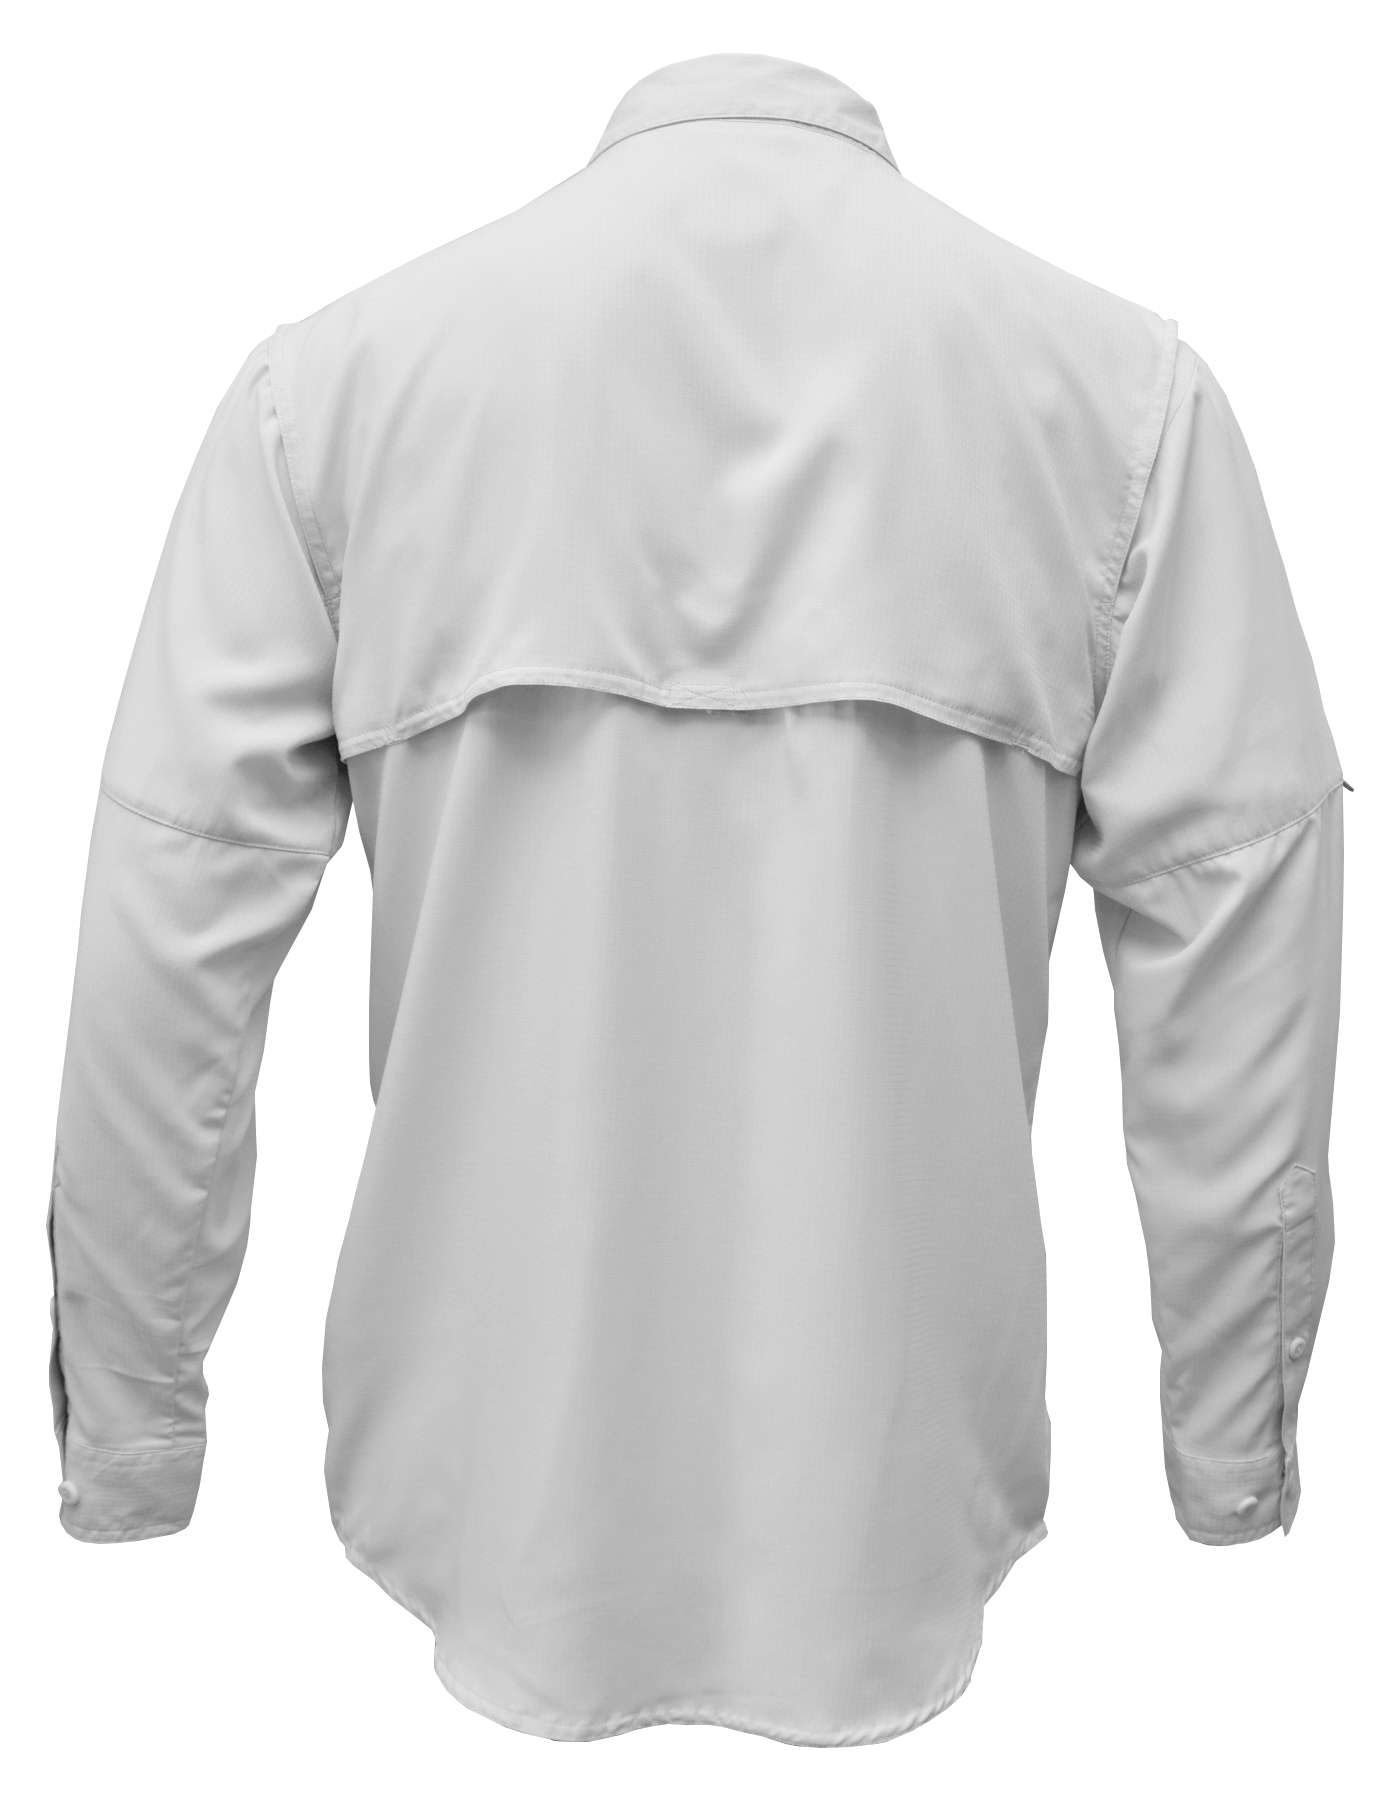 BAW Athletic Wear 3300 adult Long Sleeve Fishing Shirt with Button Down Collar Black